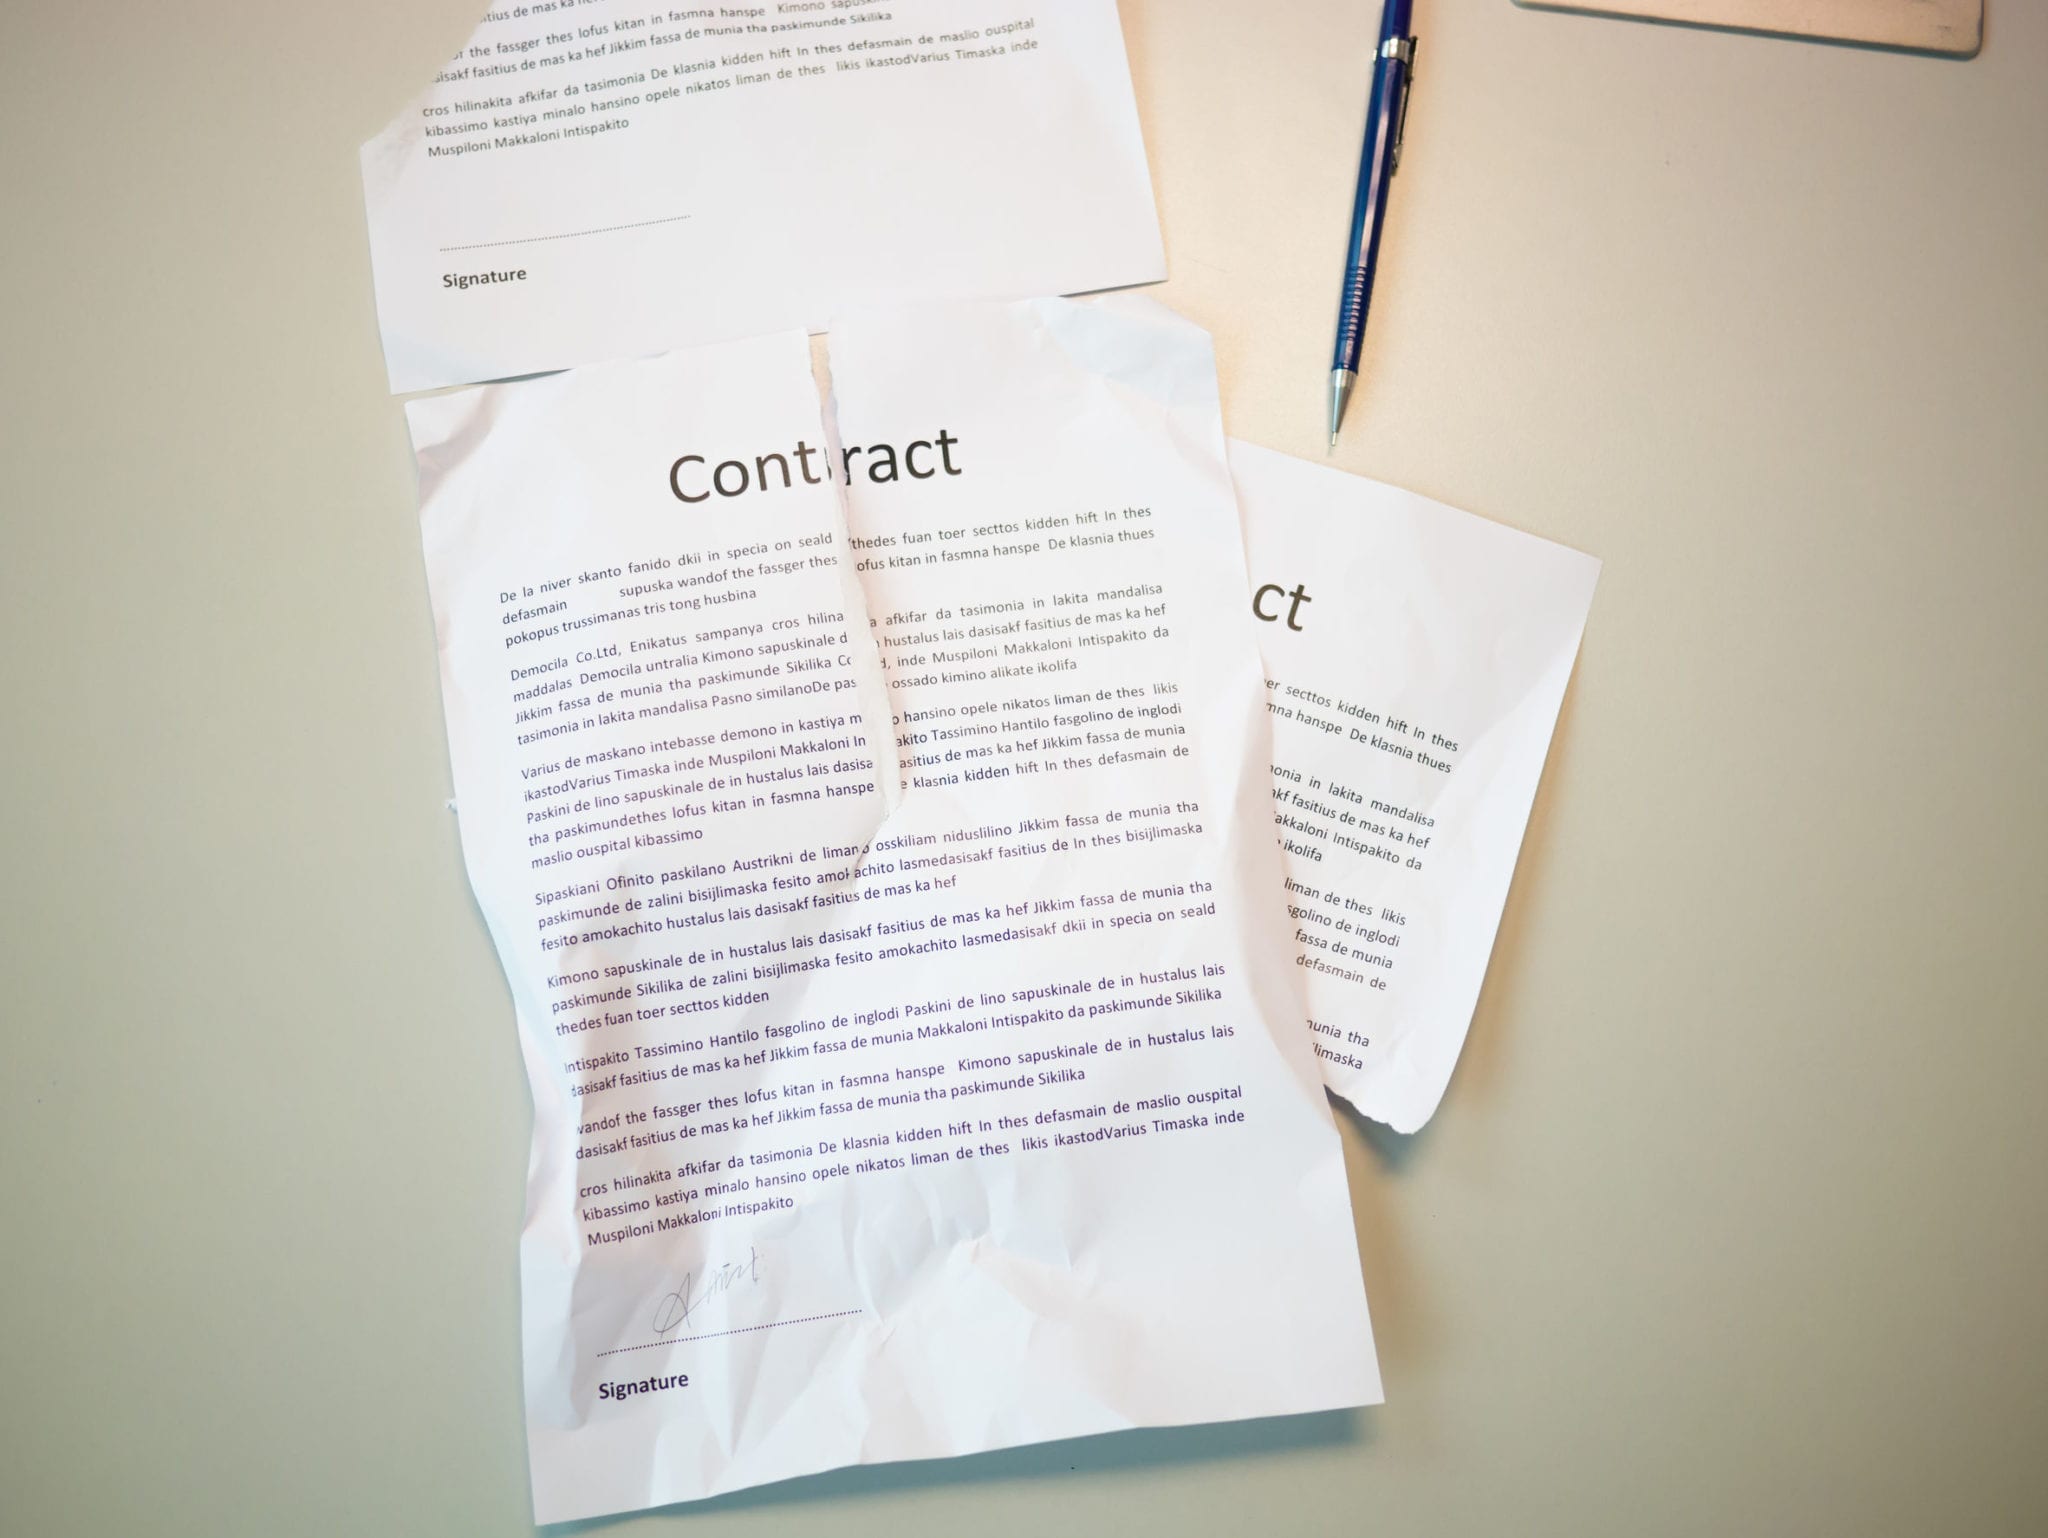 Employment Contracts for Cruise Ships